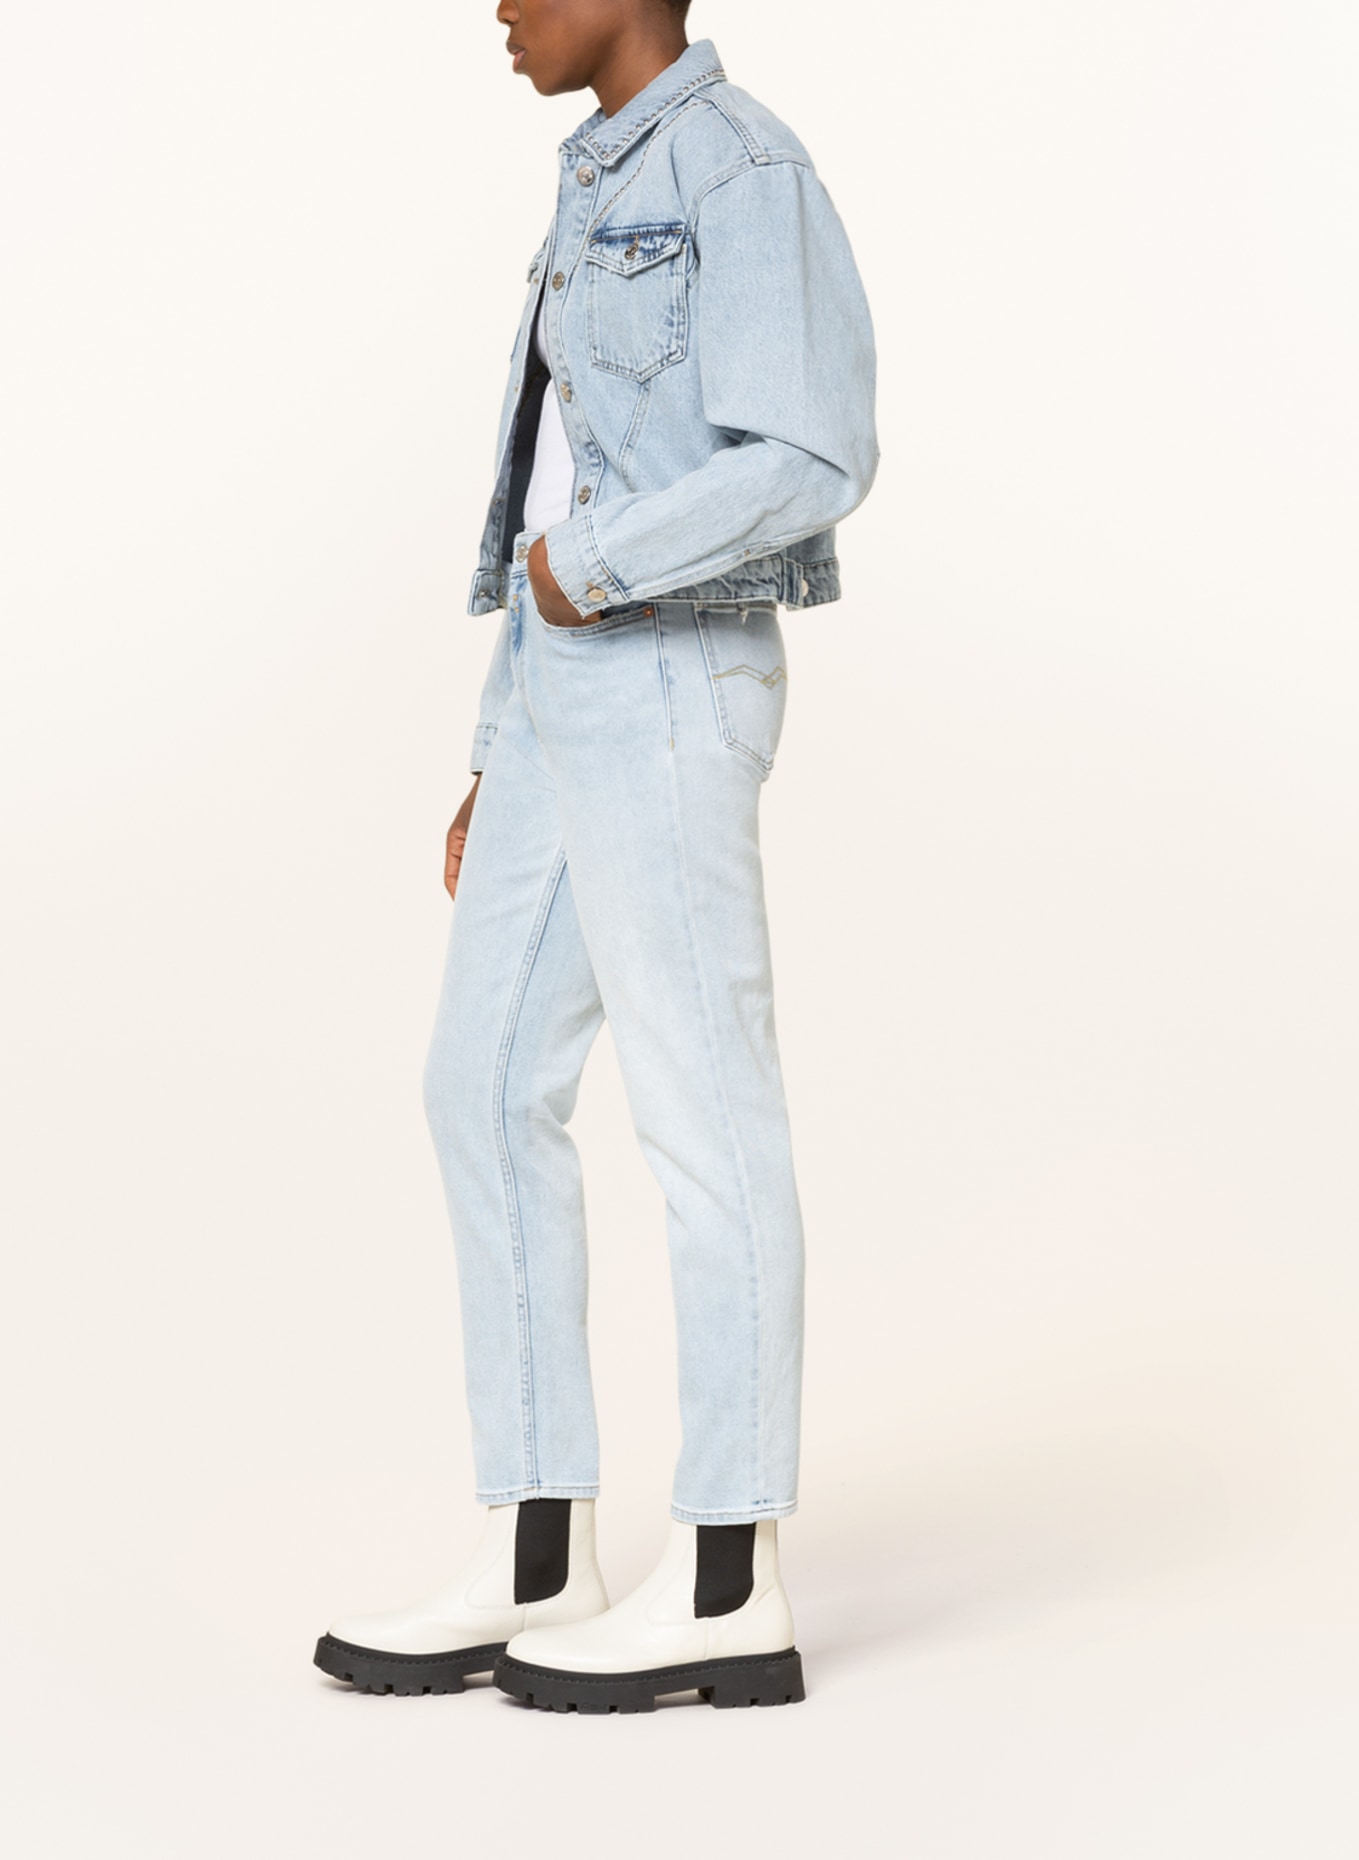 REPLAY Jeans KILEY in light super 011 blue